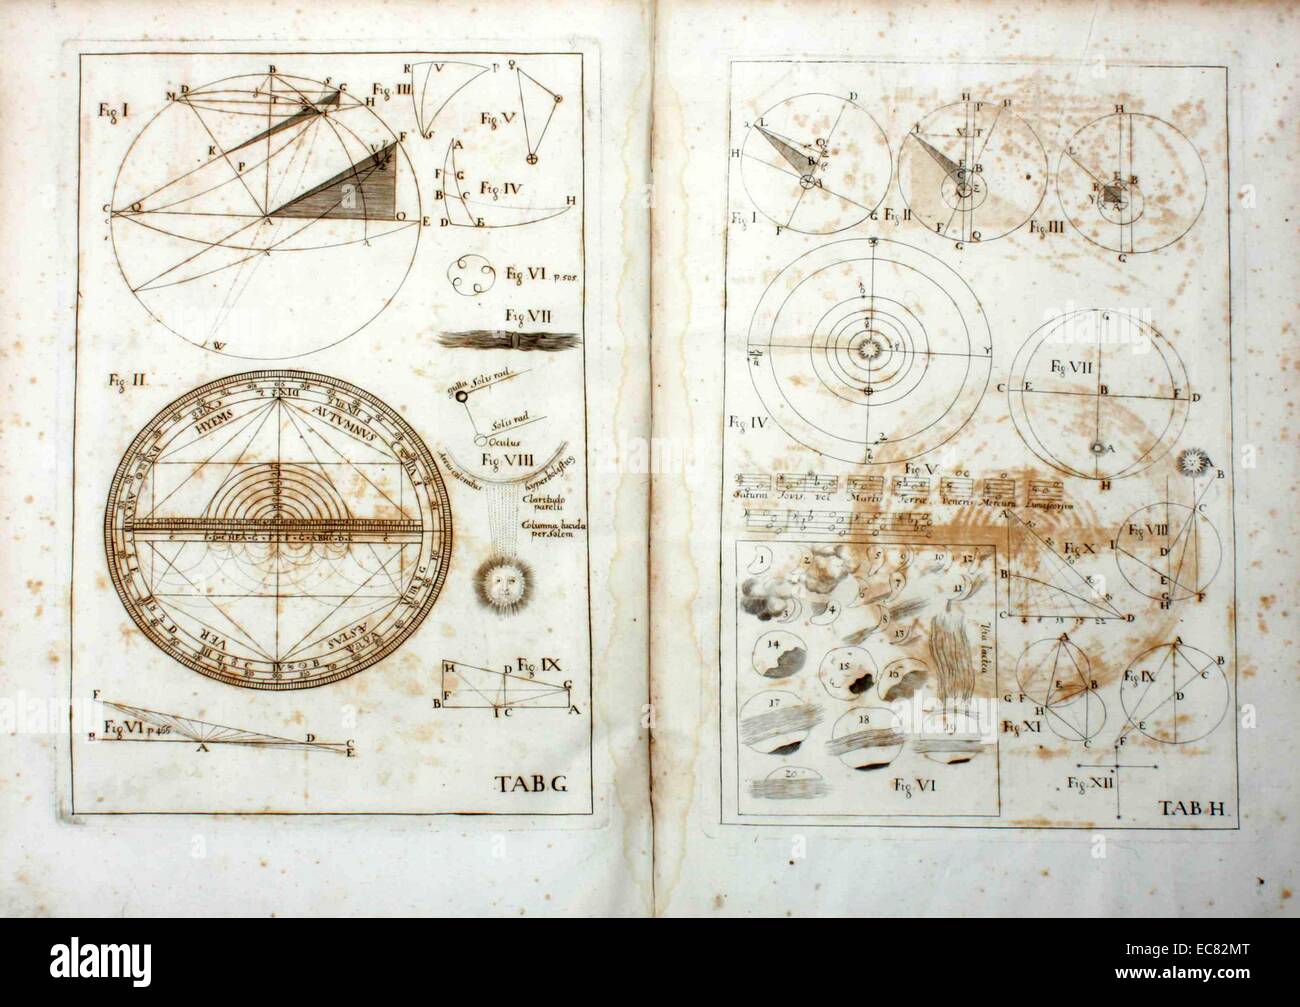 Johannes Kepler 1571 – November 15, 1630) German mathematician, astronomer, and astrologer. Joannis Kepleri aliorumque epistolae mutuae (Kepler’s scientific correspondence, edited by Michael Gottlieb Hansch, which also contains the first biography of Kepler) 1718 Stock Photo